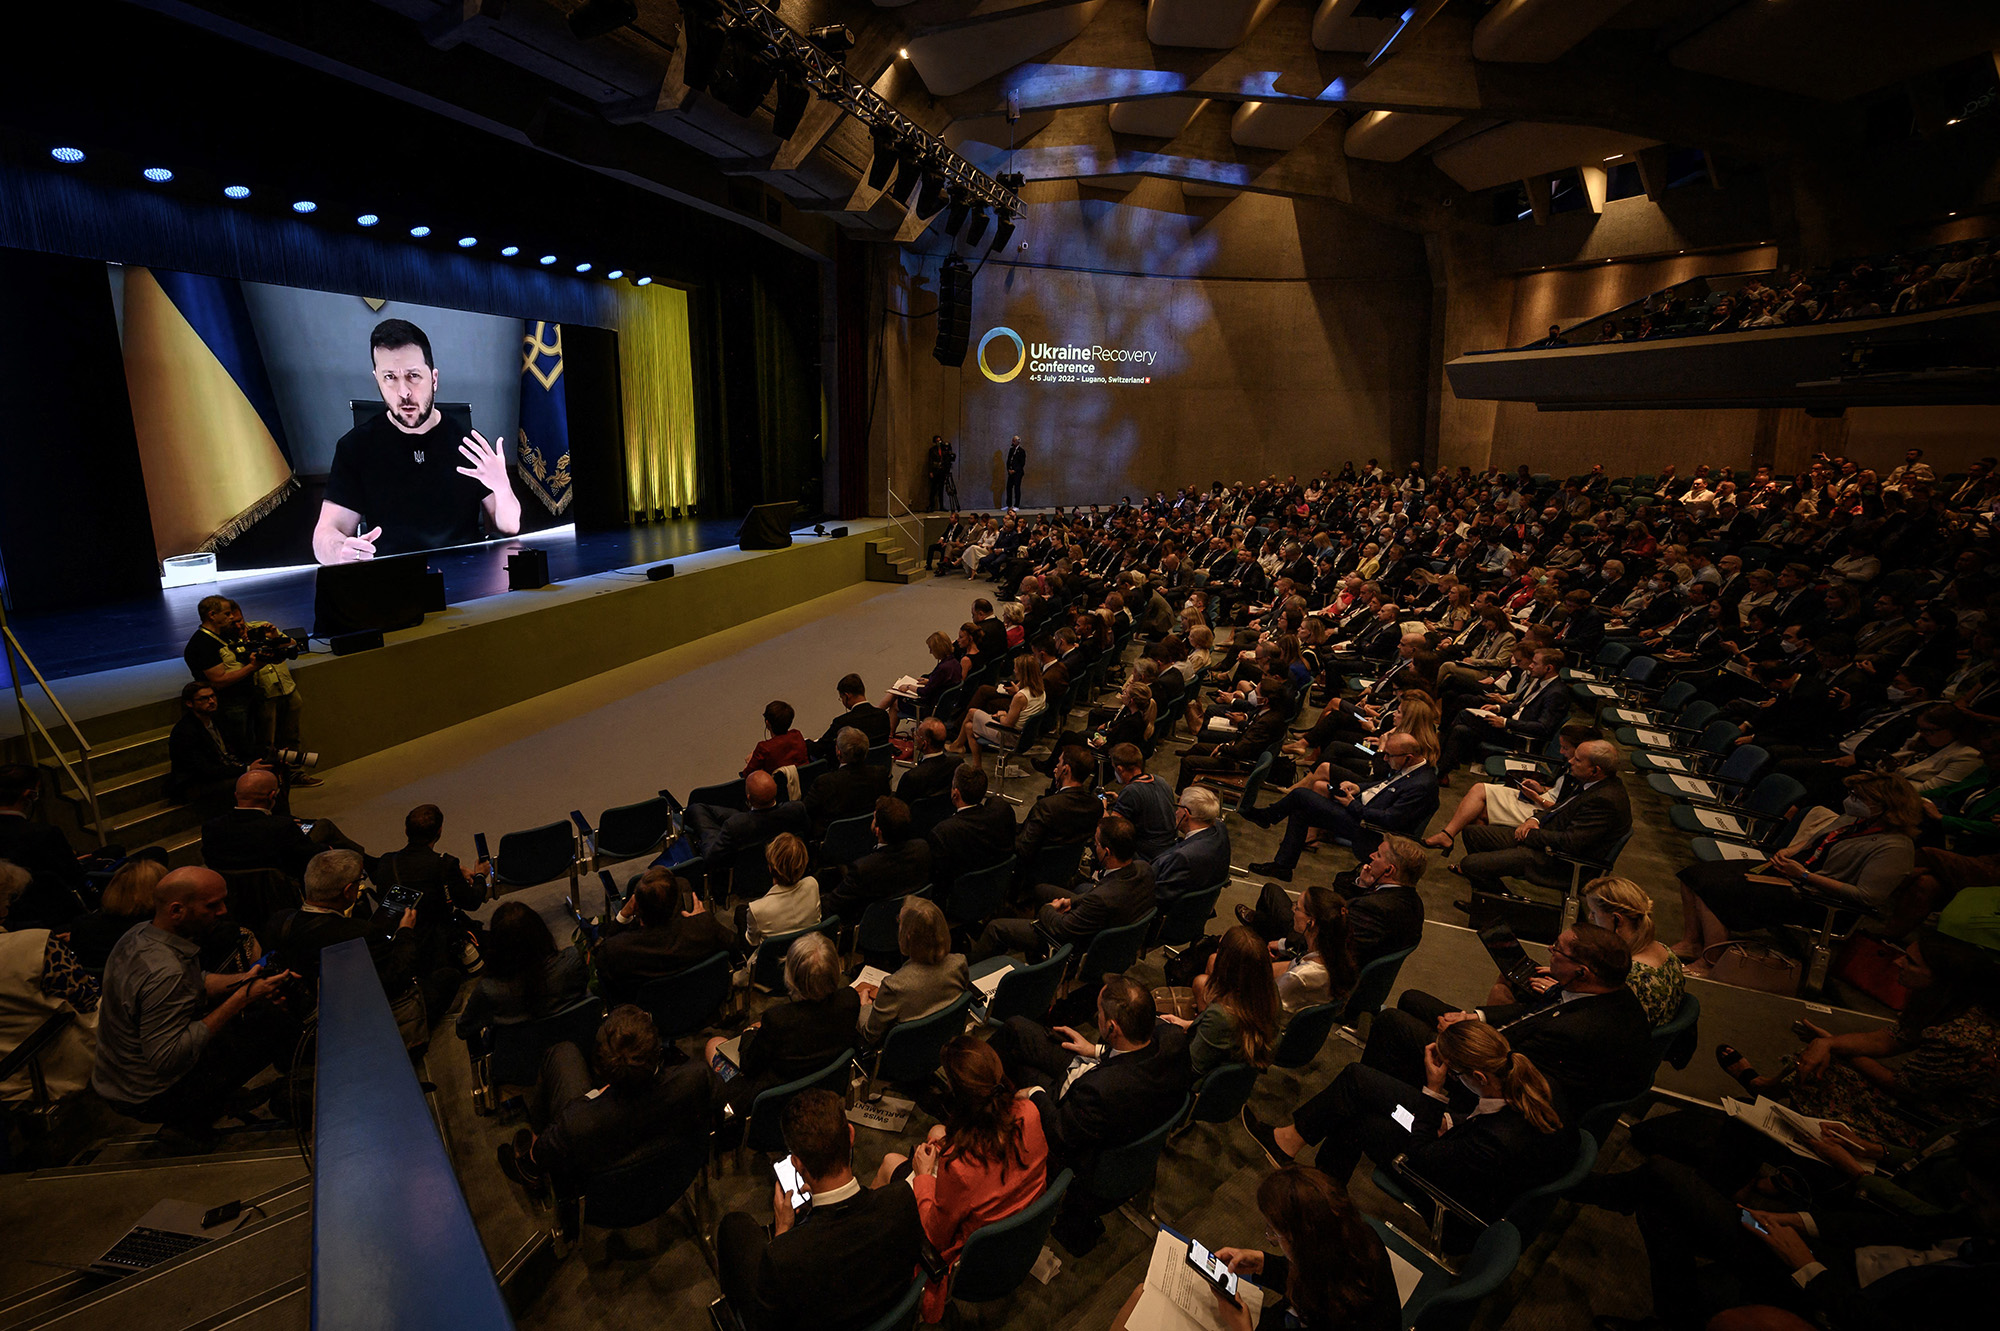 Ukraine's President Volodymyr Zelensky appears on a giant screen as he delivers a statement at the start of a two-day International conference on reconstruction of Ukraine, in Lugano, Switzerland, on July 4.